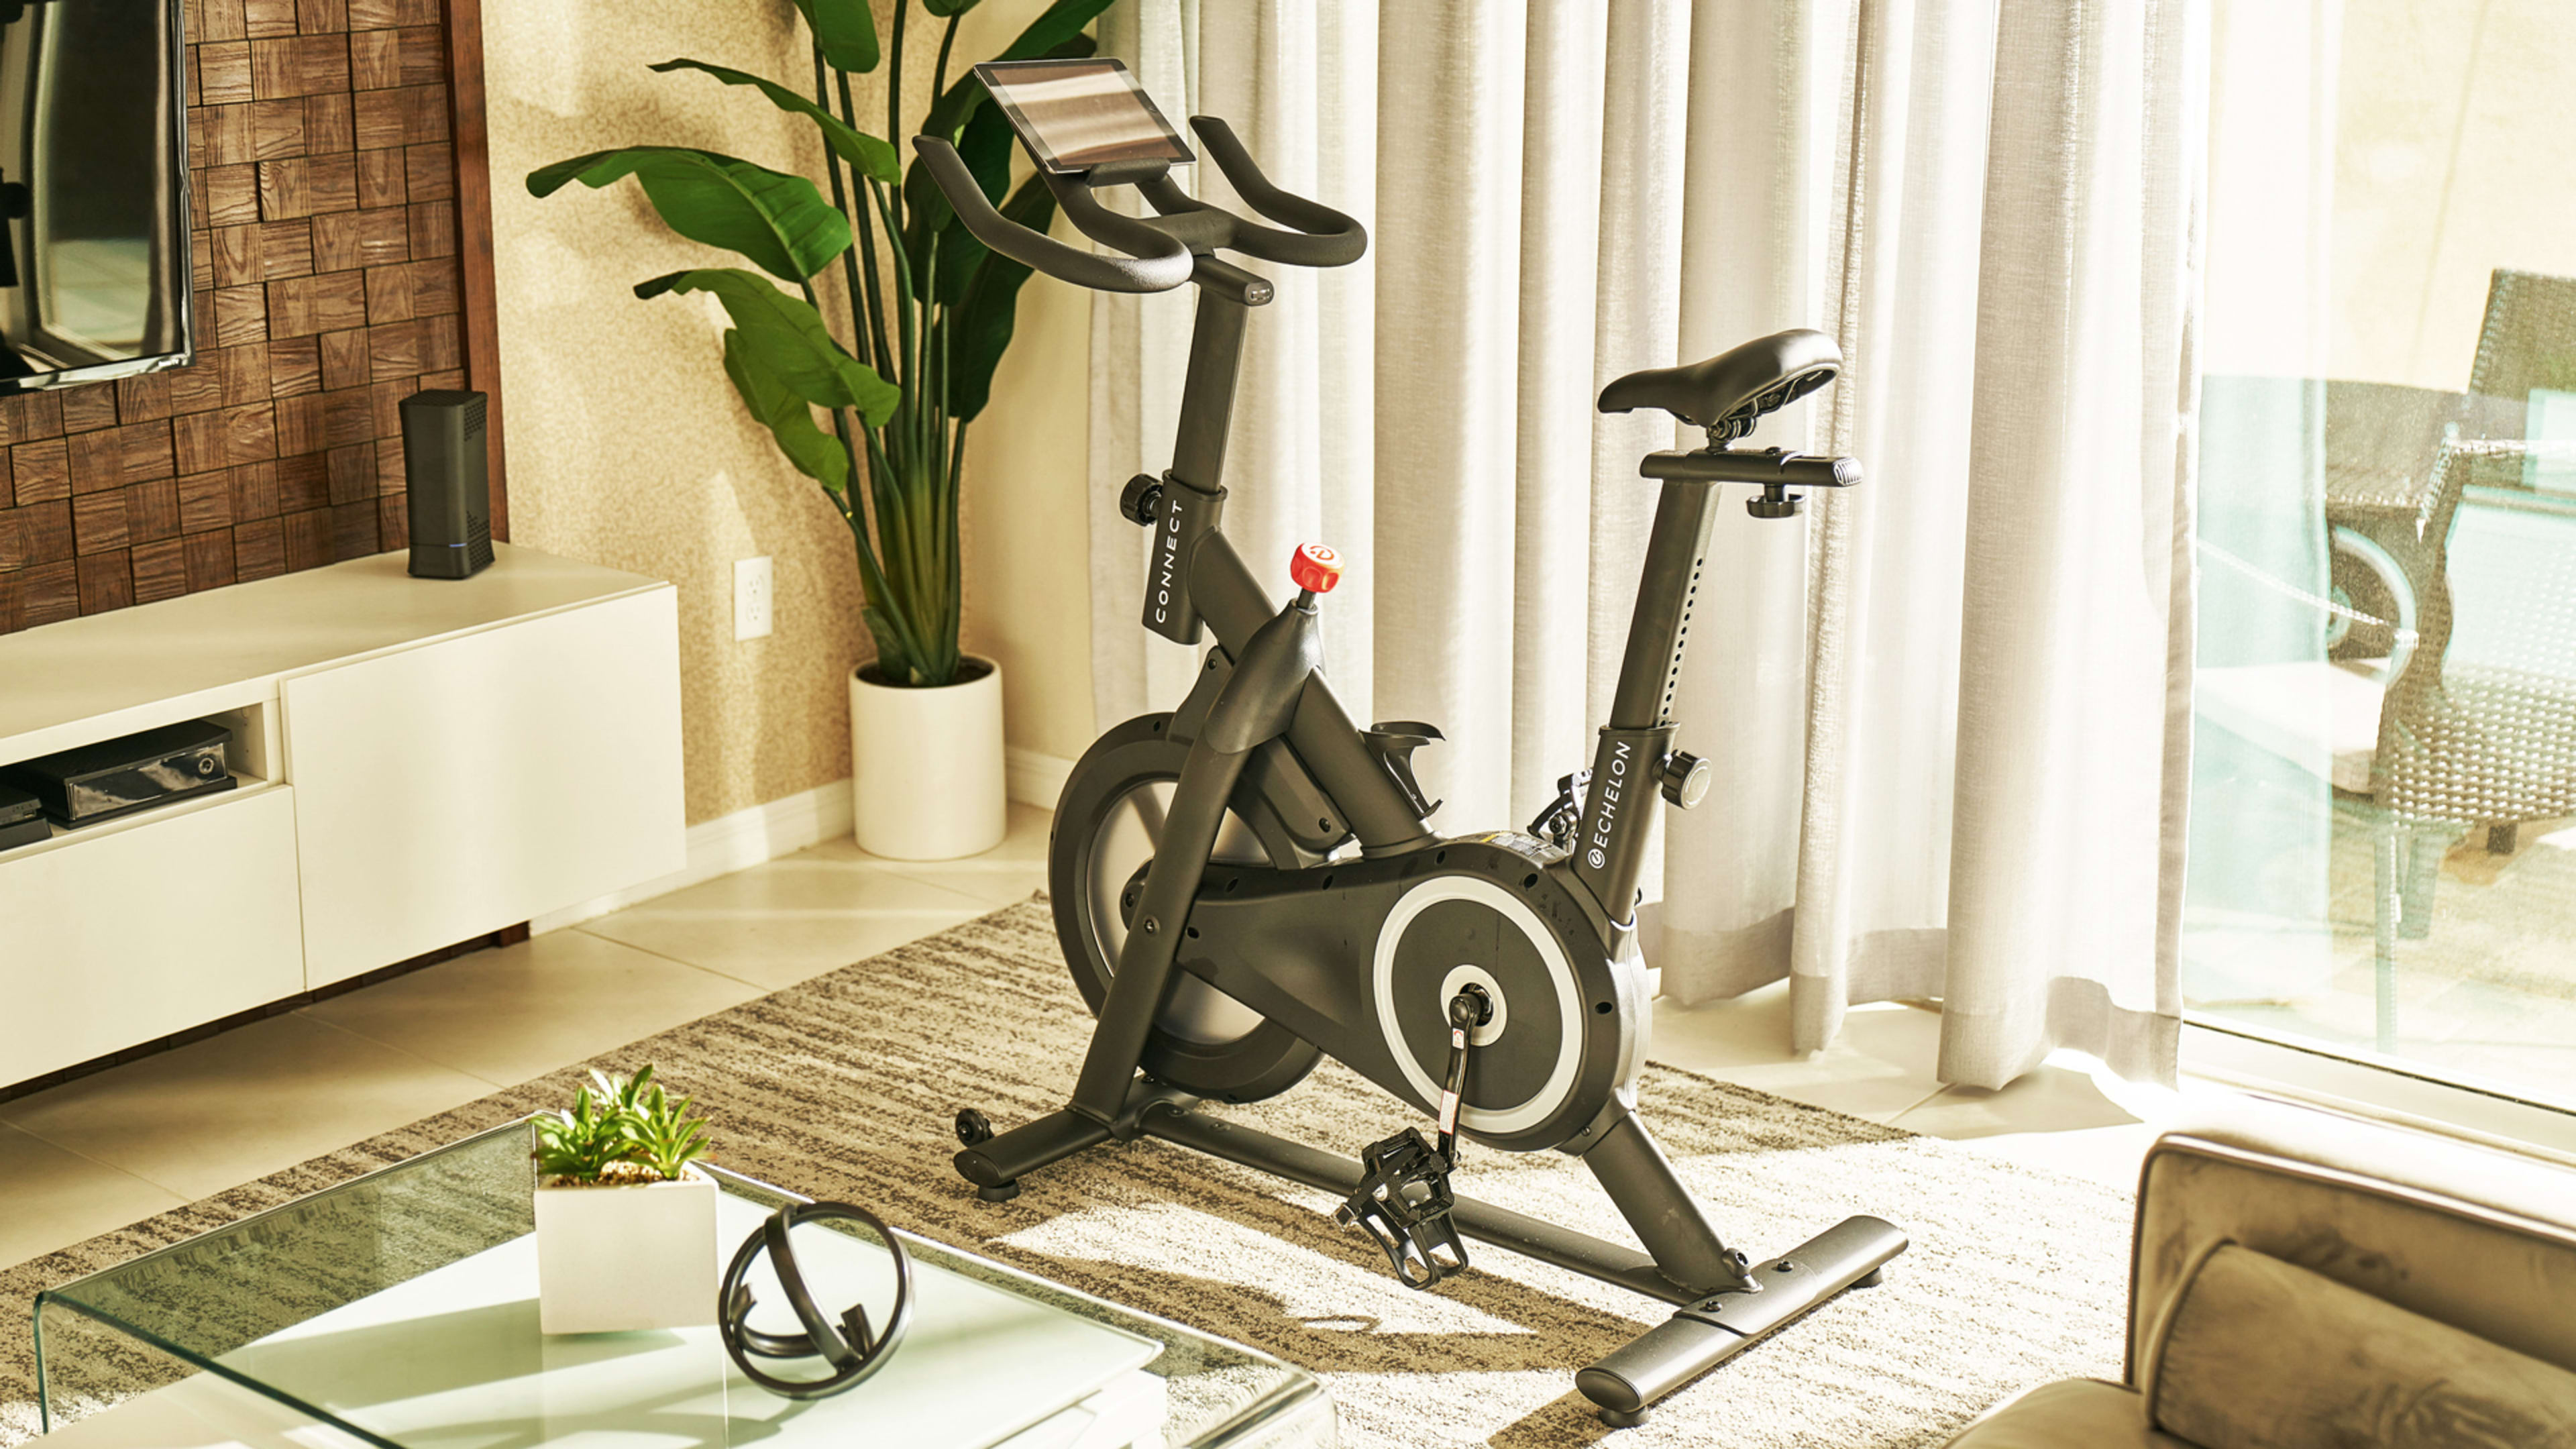 Amazon fans: Stop shopping and start pedaling this Spin bike